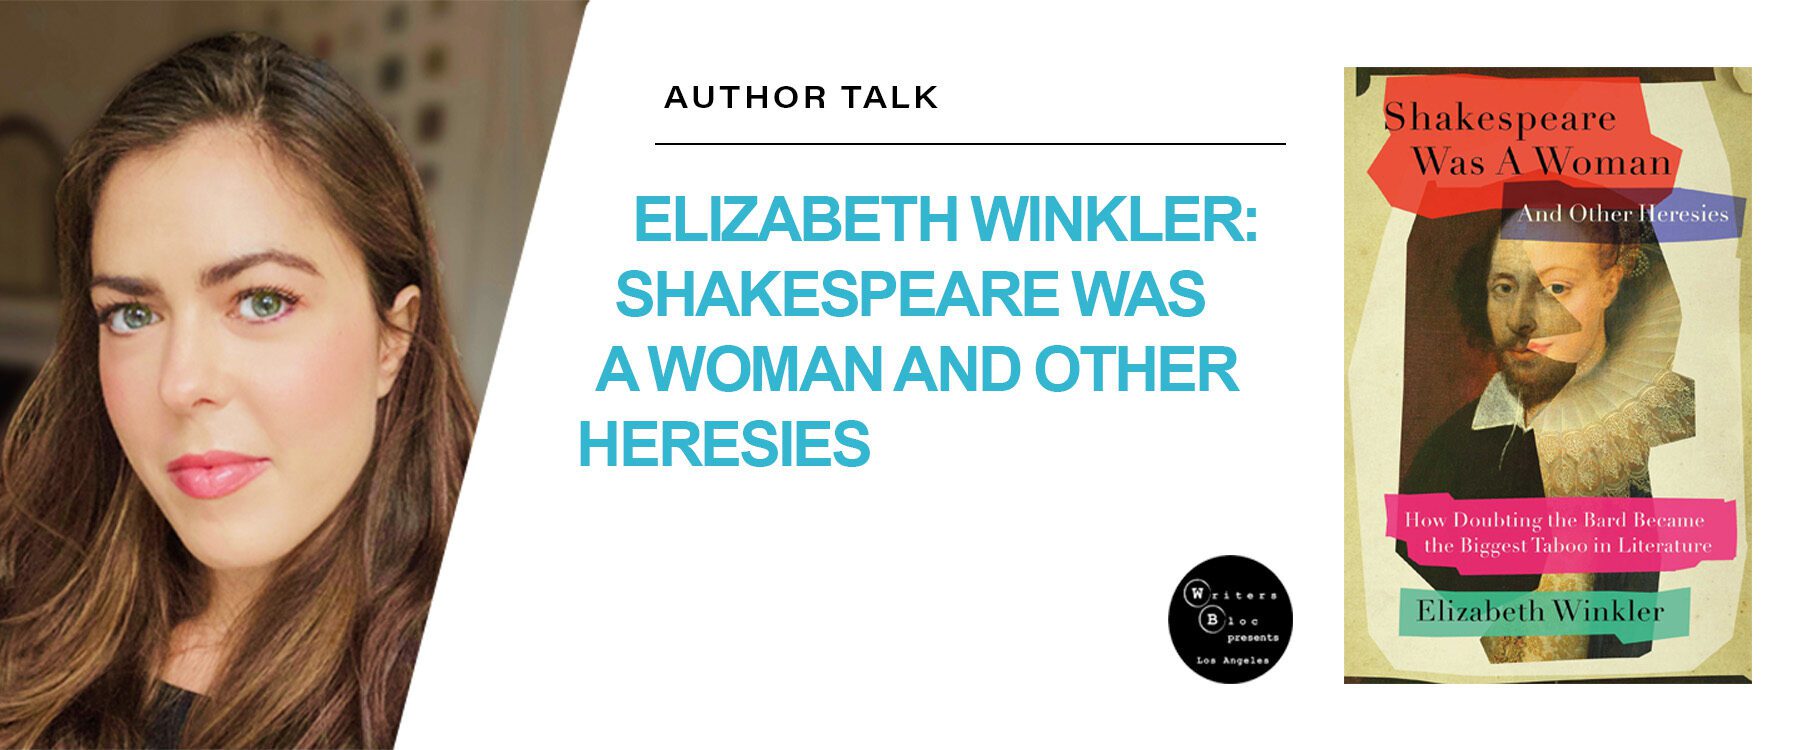 Writers Bloc presents Author Talk: Elizabeth Winkler, author of Shakespeare Was A Woman and Other Heresies